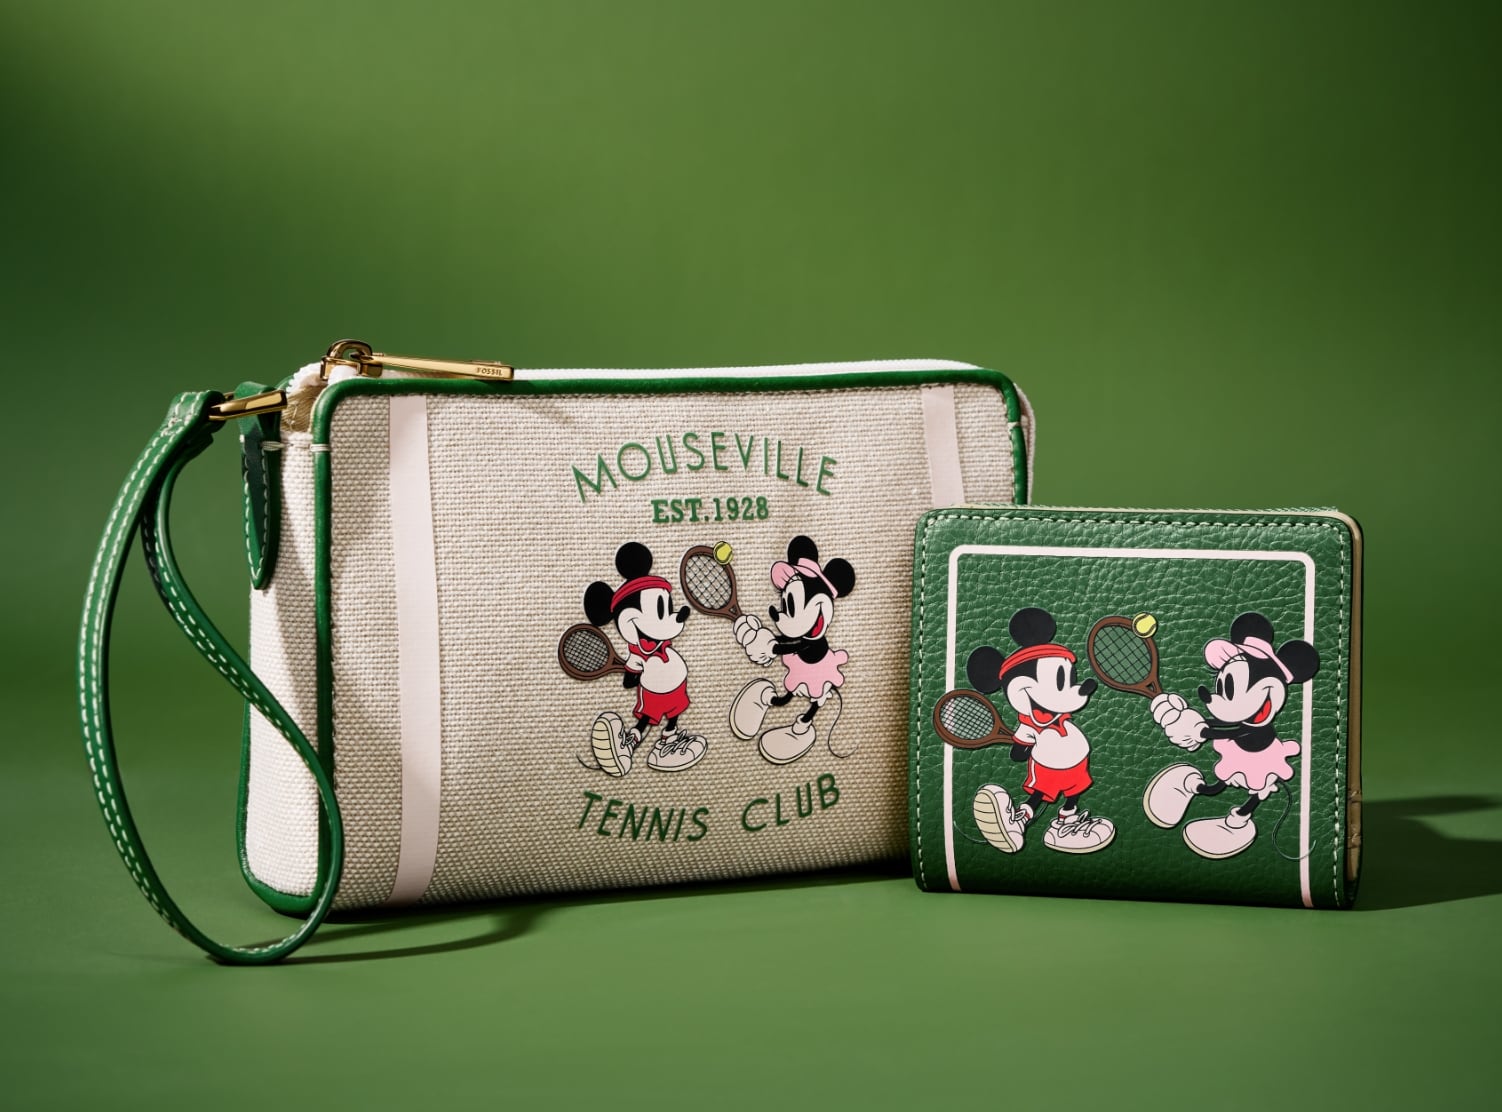 Our special-edition Disney Tennis wristlet and bifold wallet, shown side by side on a tennis court green background. The wristlet is crafted of cotton canvas with green leather trim. It features a screenprinted graphic of Mickey and Minnie playing tennis with the text 'Mouseville Tennis Club, Est. 1928.' The bifold wallet is screenprinted with the same custom graphic on rich green leather.